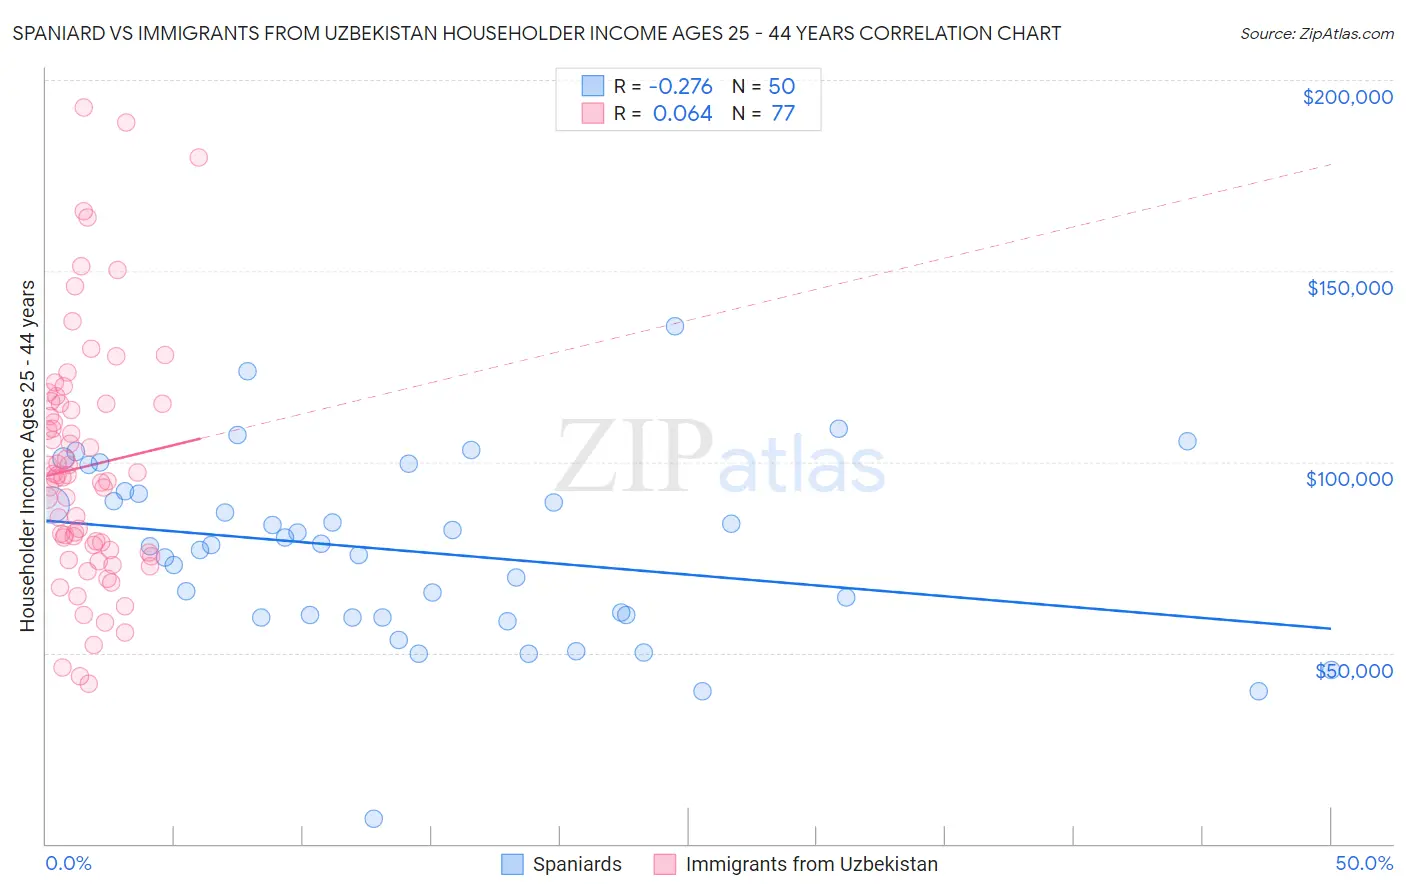 Spaniard vs Immigrants from Uzbekistan Householder Income Ages 25 - 44 years